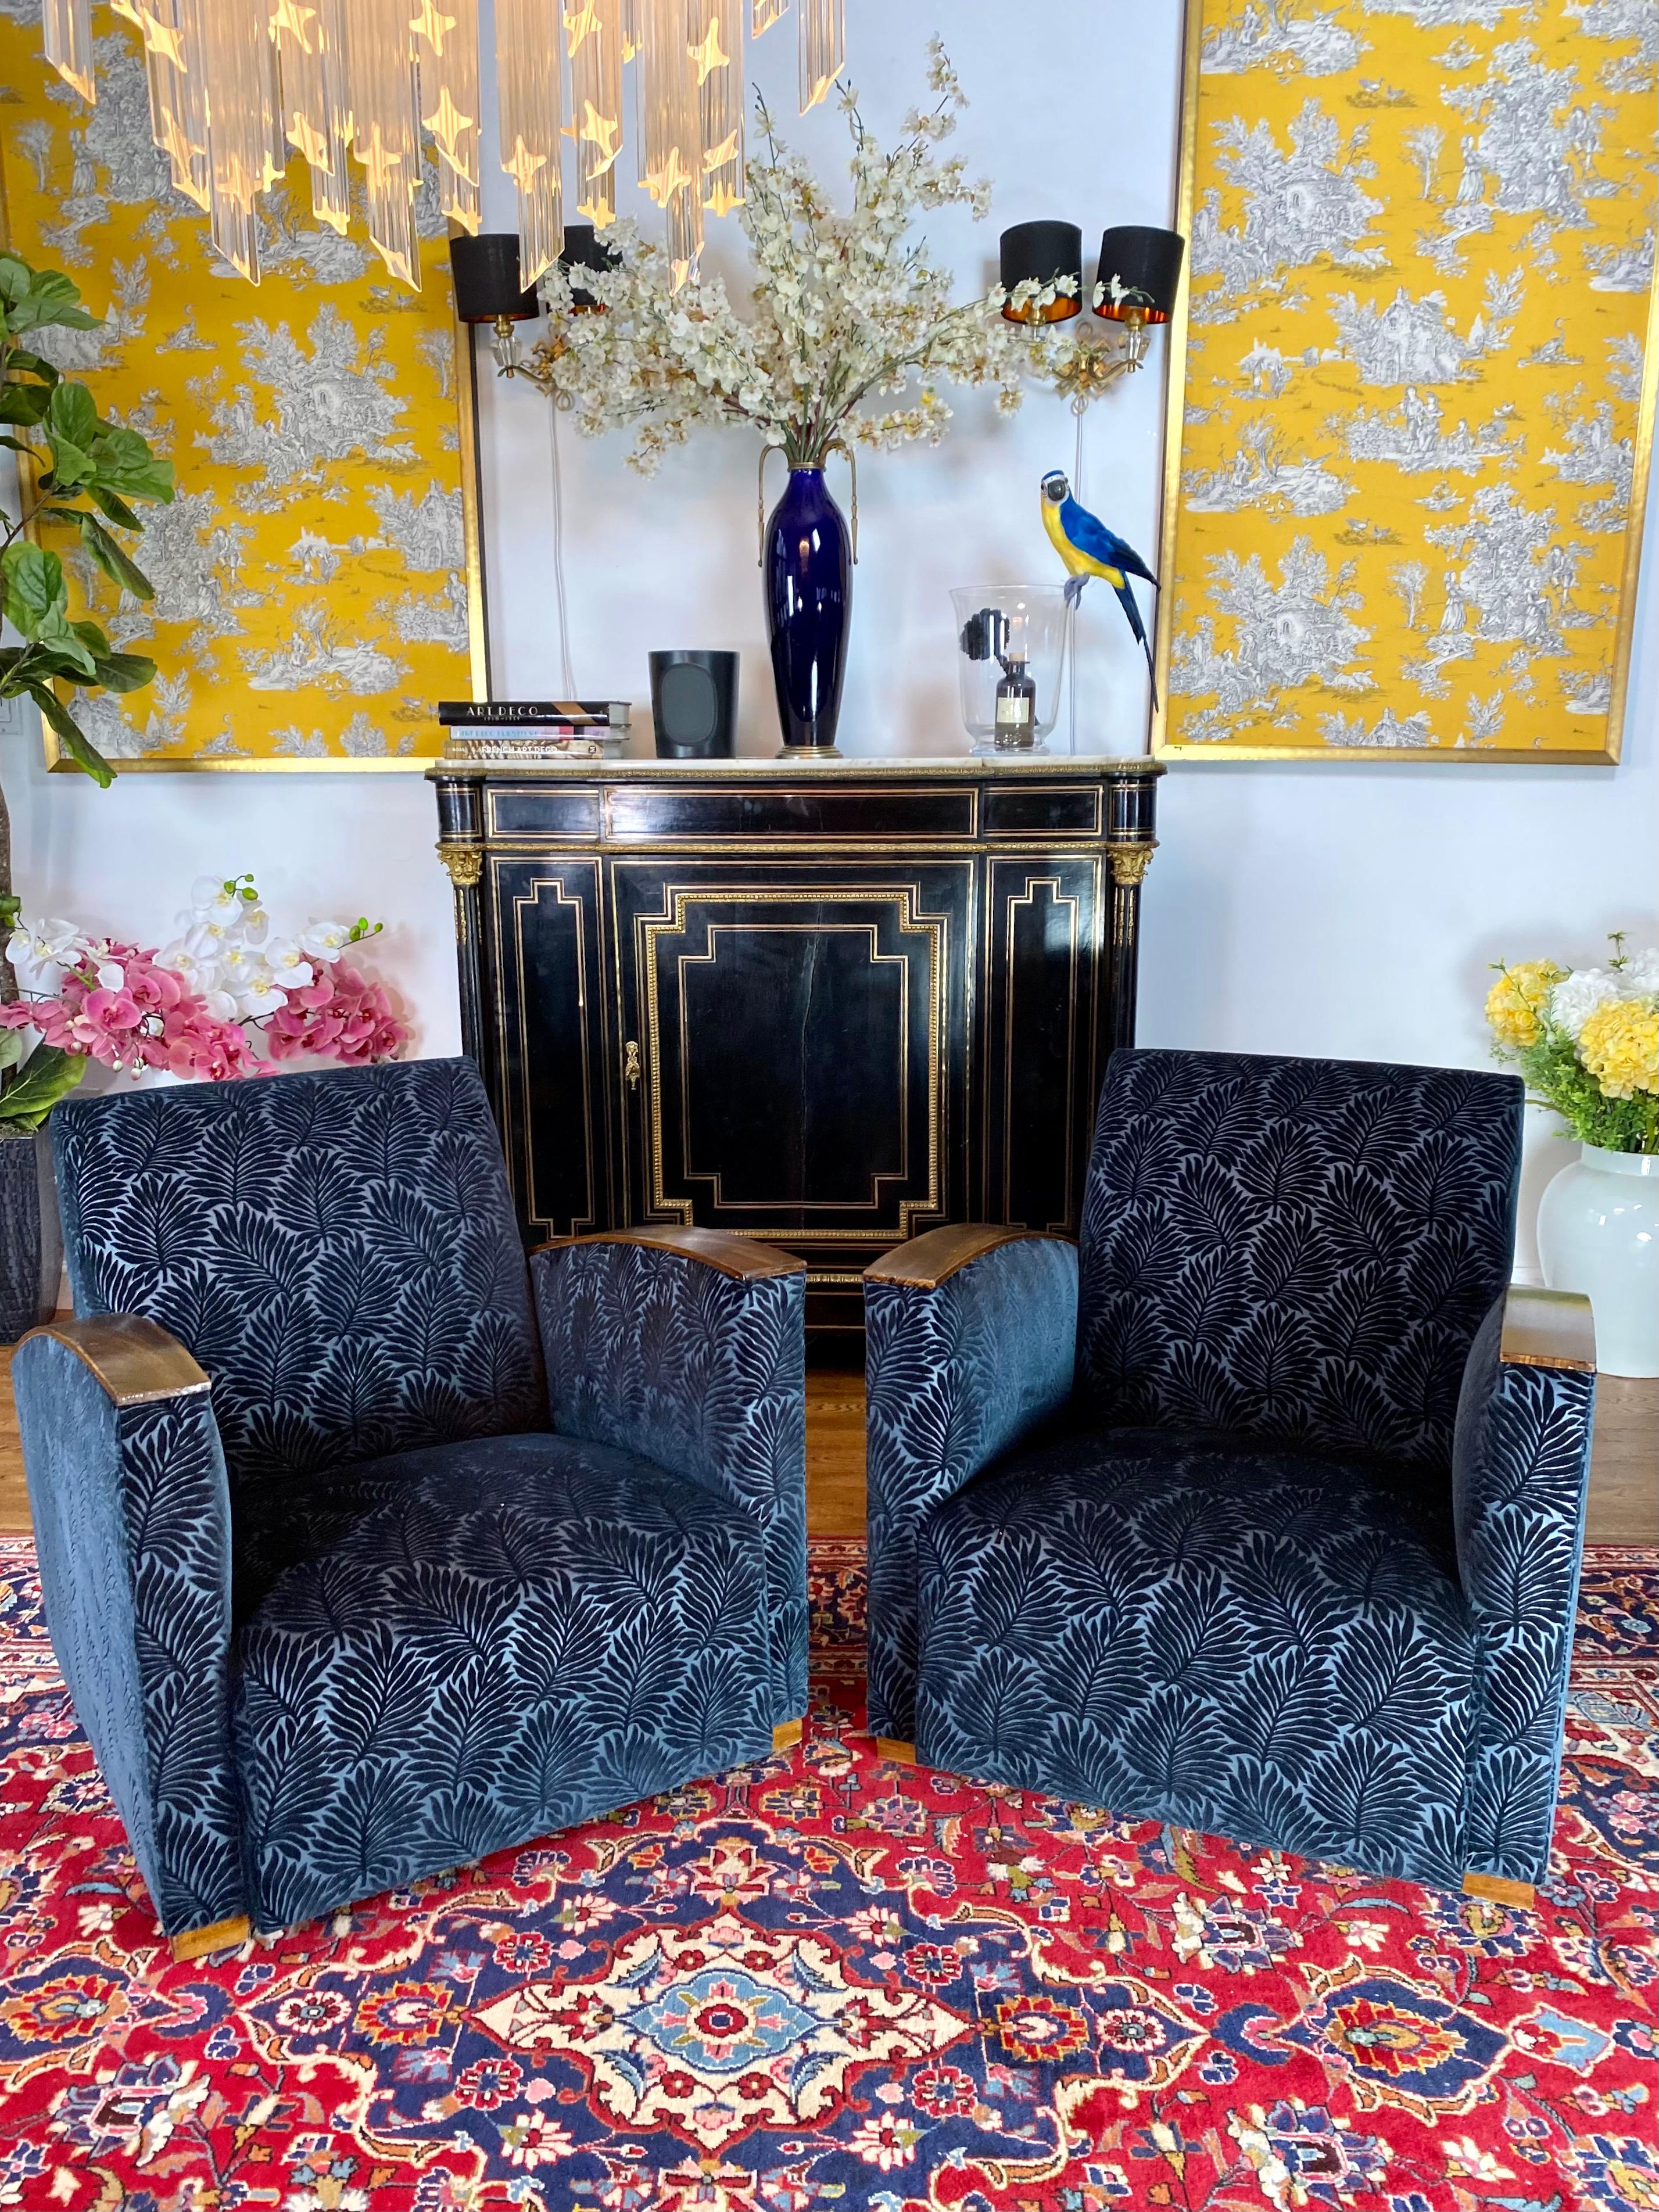 1930 pair of French Art Deco club chairs from France. Beautifully restored and reupholstered by our inhouse master upholsterer with Blue Velvet Nobilis fabric. Excellent condition.